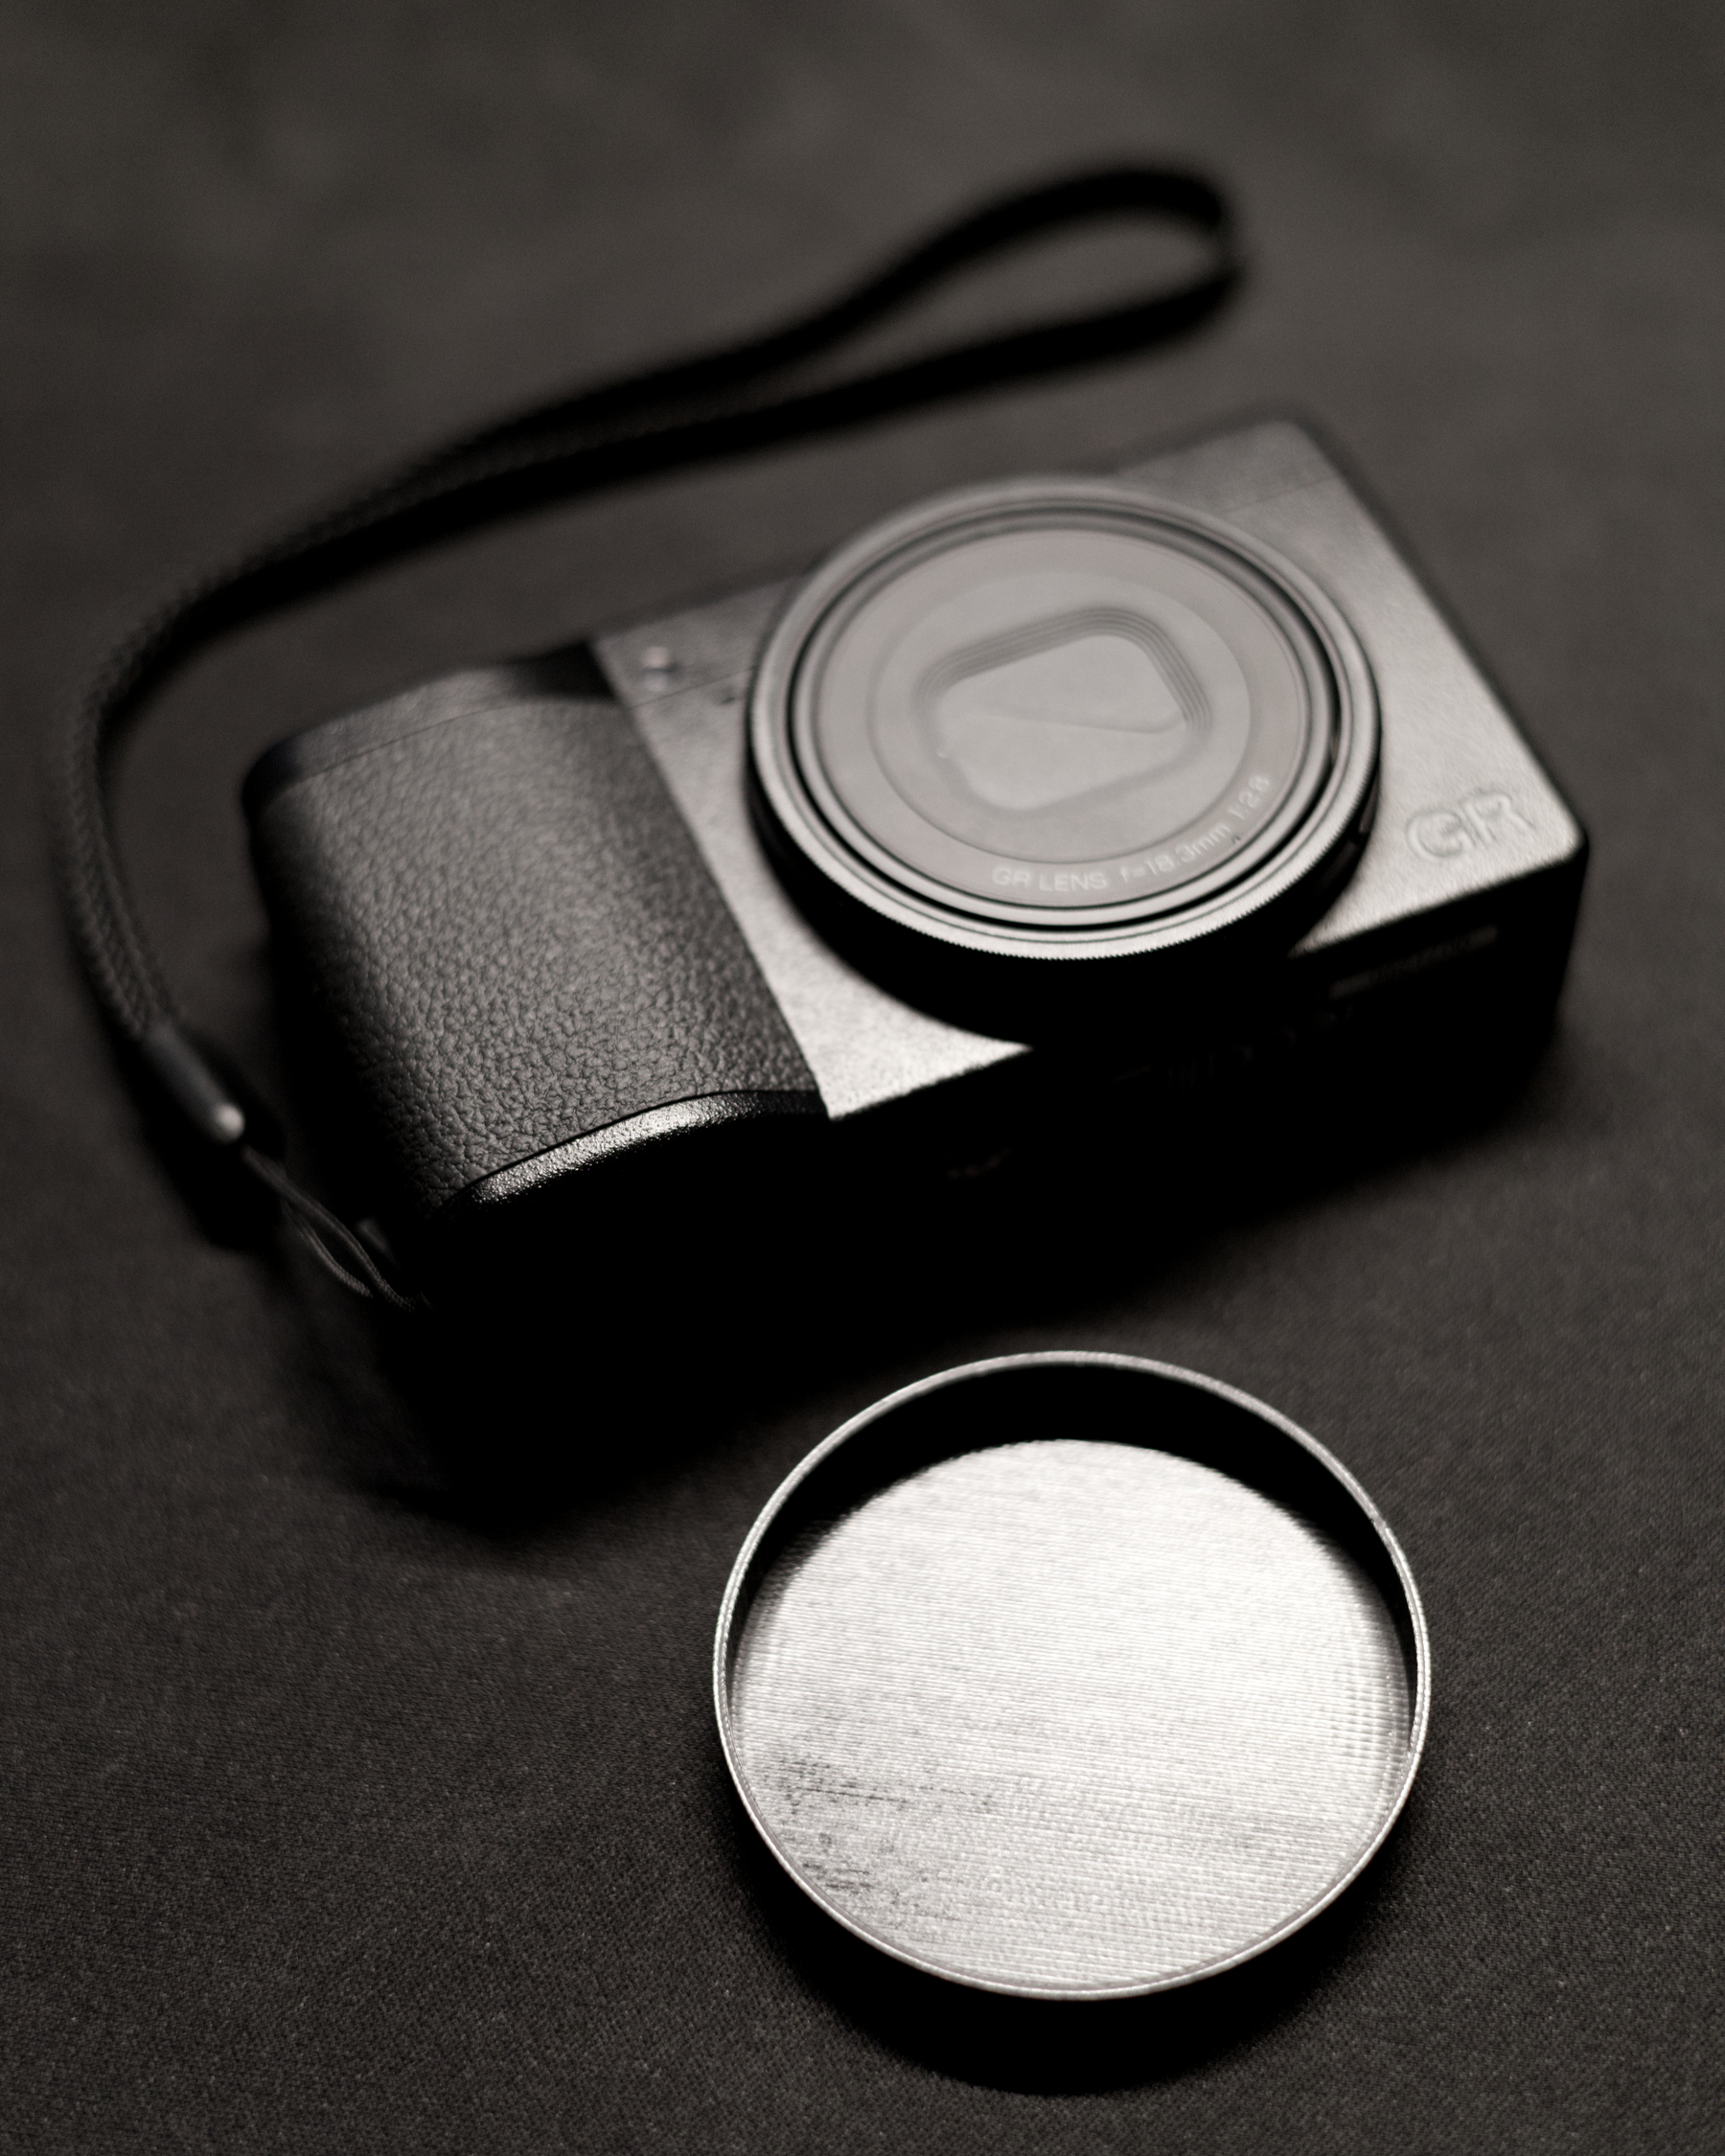 My Ricoh GR III with a 3D printed Lens Cap